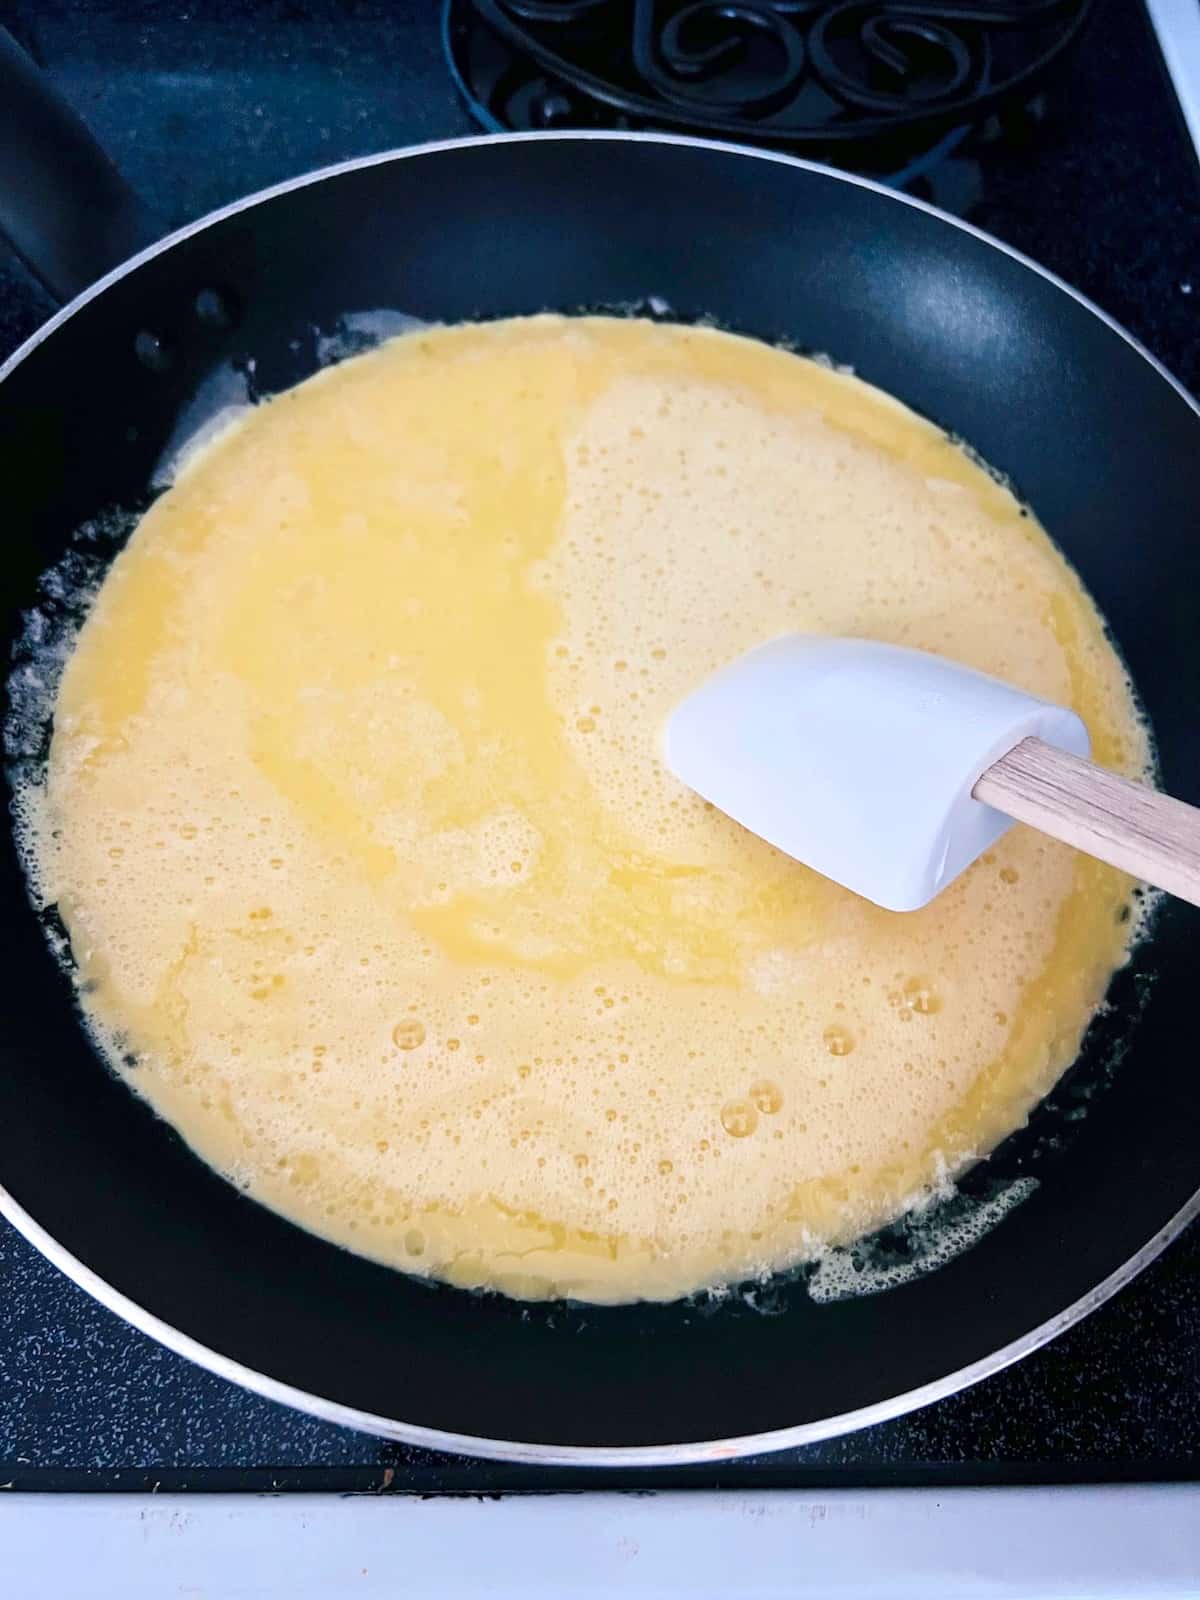 Raw eggs pouring into the skillet with melted butter.